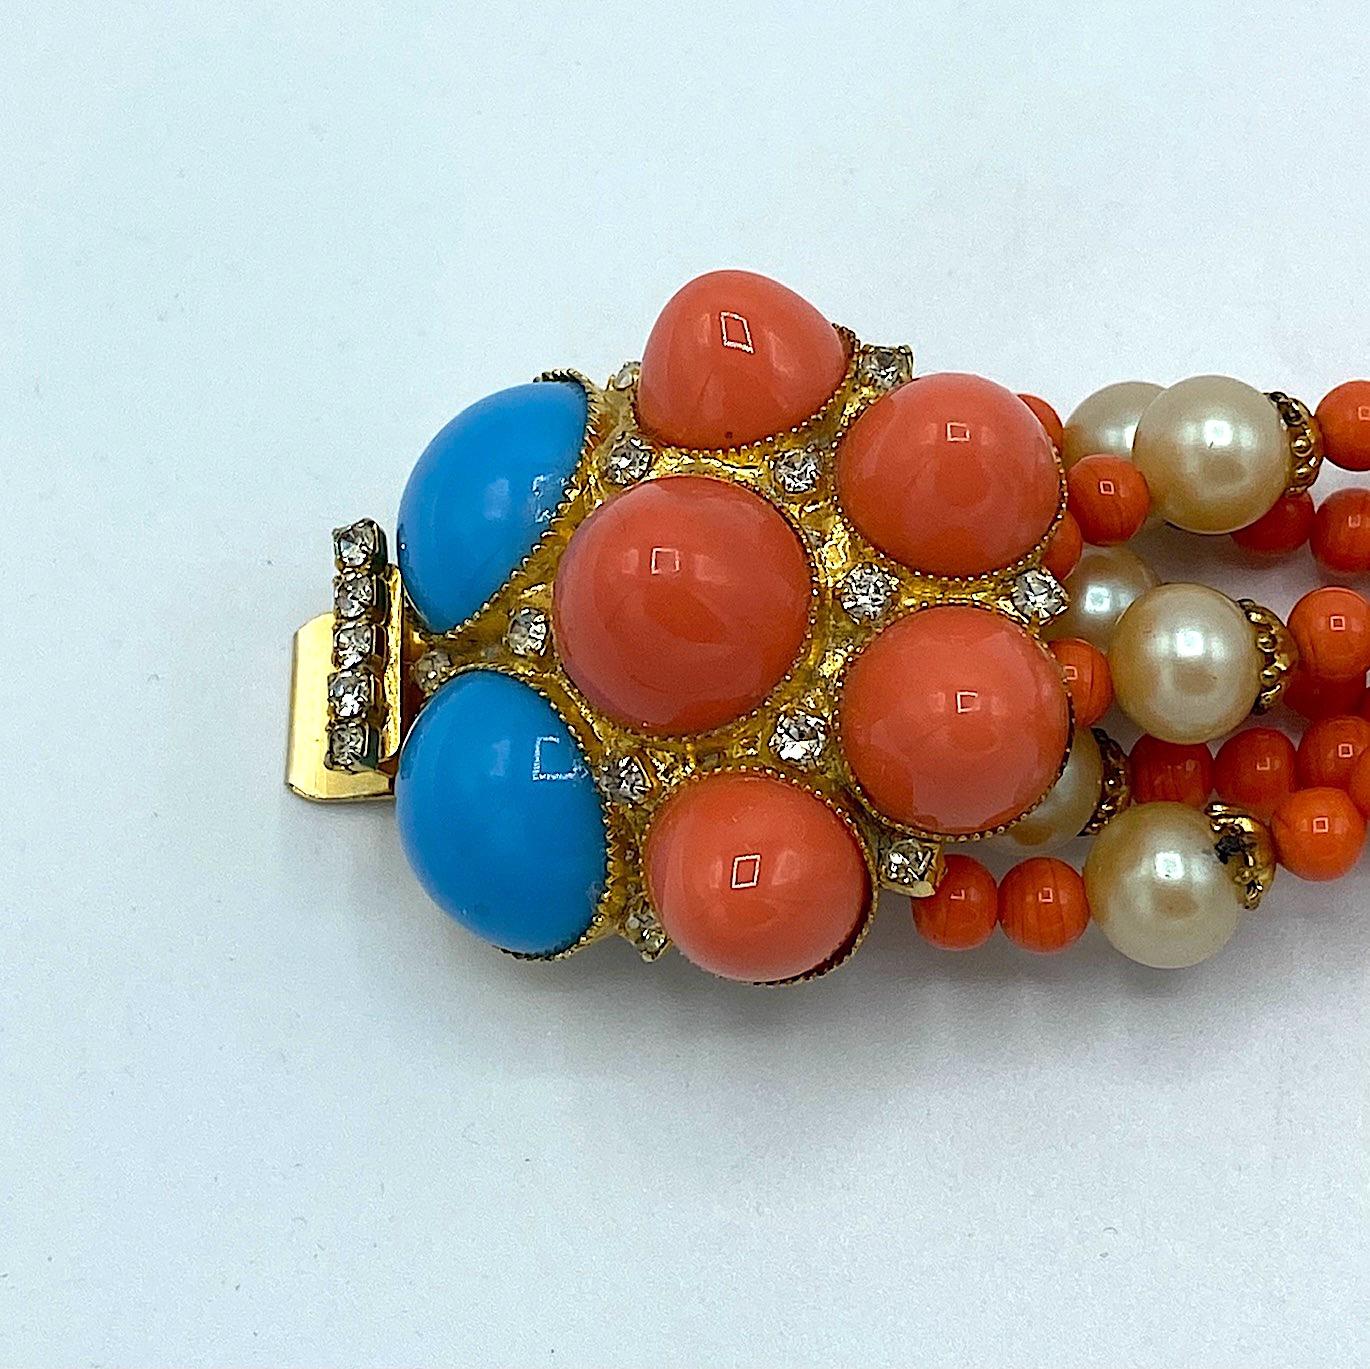 De Lillo 1970s Faux Coral & Turquoise Bracelet and Earrings 14